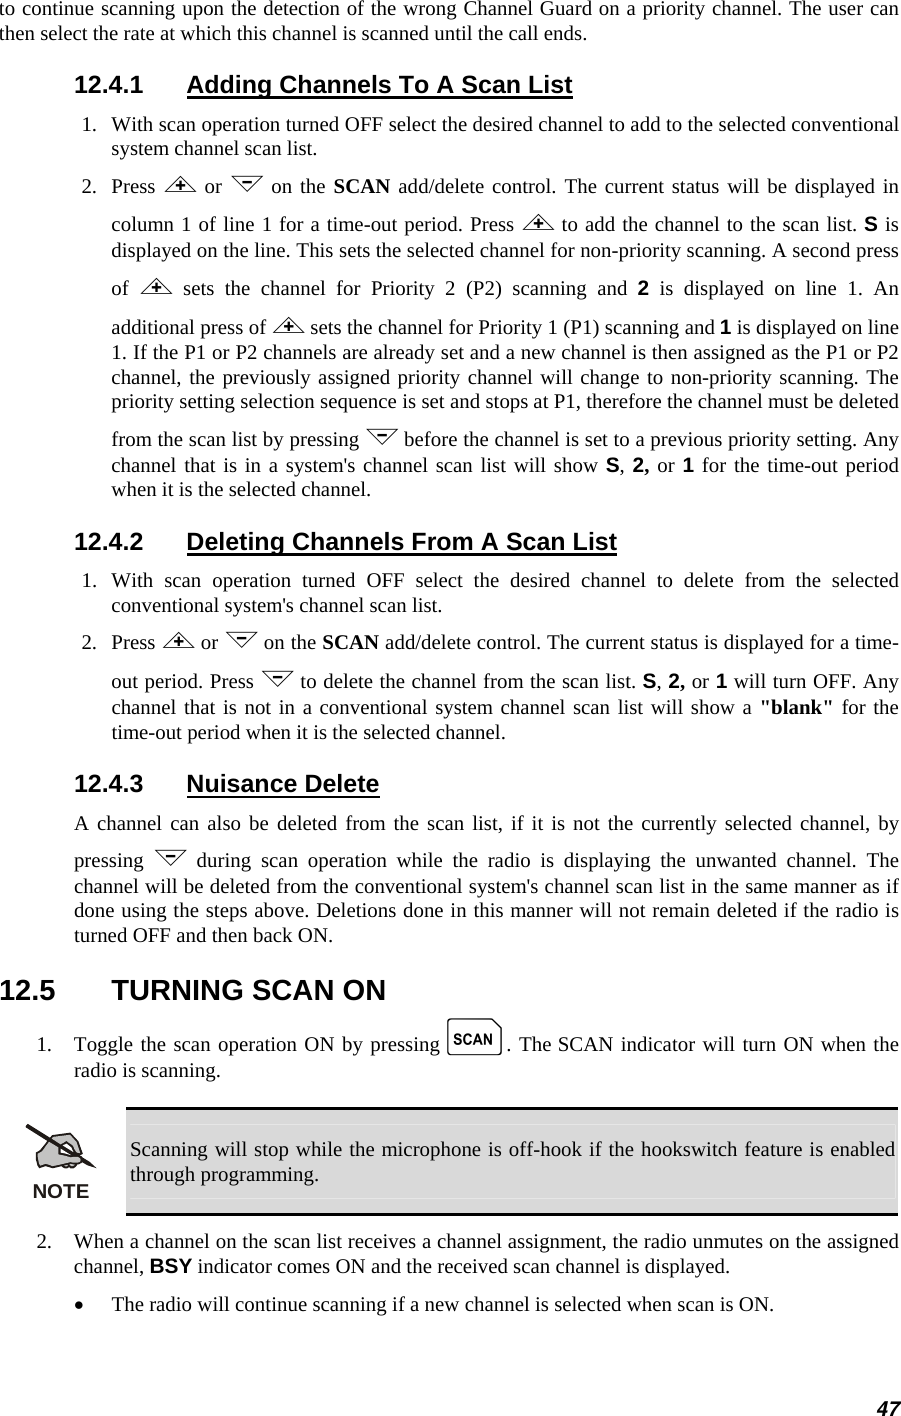 to continue scanning upon the detection of the wrong Channel Guard on a priority channel. The user can then select the rate at which this channel is scanned until the call ends. 12.4.1  Adding Channels To A Scan List 1.  With scan operation turned OFF select the desired channel to add to the selected conventional system channel scan list. 2.   Press &lt; or &gt; on the SCAN add/delete control. The current status will be displayed in column 1 of line 1 for a time-out period. Press &lt; to add the channel to the scan list. S is displayed on the line. This sets the selected channel for non-priority scanning. A second press of  &lt; sets the channel for Priority 2 (P2) scanning and 2 is displayed on line 1. An additional press of &lt; sets the channel for Priority 1 (P1) scanning and 1 is displayed on line 1. If the P1 or P2 channels are already set and a new channel is then assigned as the P1 or P2 channel, the previously assigned priority channel will change to non-priority scanning. The priority setting selection sequence is set and stops at P1, therefore the channel must be deleted from the scan list by pressing &gt; before the channel is set to a previous priority setting. Any channel that is in a system&apos;s channel scan list will show S, 2, or 1 for the time-out period when it is the selected channel. 12.4.2  Deleting Channels From A Scan List 1.  With scan operation turned OFF select the desired channel to delete from the selected conventional system&apos;s channel scan list. 2.   Press &lt; or &gt; on the SCAN add/delete control. The current status is displayed for a time-out period. Press &gt; to delete the channel from the scan list. S, 2, or 1 will turn OFF. Any channel that is not in a conventional system channel scan list will show a &quot;blank&quot; for the time-out period when it is the selected channel. 12.4.3 Nuisance Delete A channel can also be deleted from the scan list, if it is not the currently selected channel, by pressing  &gt; during scan operation while the radio is displaying the unwanted channel. The channel will be deleted from the conventional system&apos;s channel scan list in the same manner as if done using the steps above. Deletions done in this manner will not remain deleted if the radio is turned OFF and then back ON. 12.5  TURNING SCAN ON 1.   Toggle the scan operation ON by pressing k. The SCAN indicator will turn ON when the radio is scanning.  NOTE Scanning will stop while the microphone is off-hook if the hookswitch feature is enabled through programming. 2.   When a channel on the scan list receives a channel assignment, the radio unmutes on the assigned channel, BSY indicator comes ON and the received scan channel is displayed. •  The radio will continue scanning if a new channel is selected when scan is ON. 47 